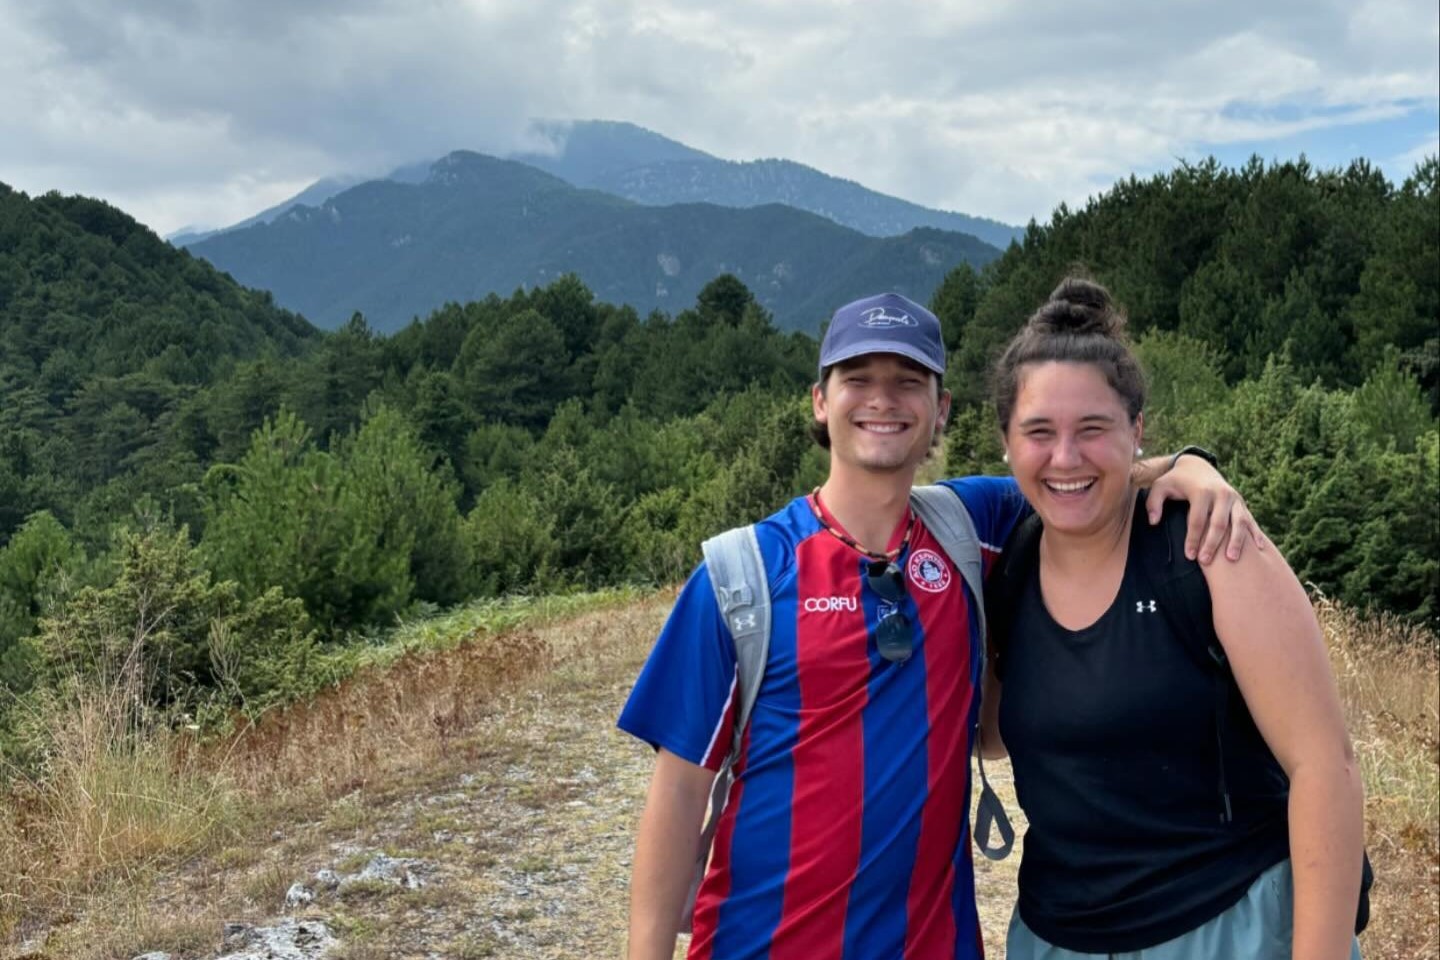 Siblings pose for photo on trail with mountains in the background.